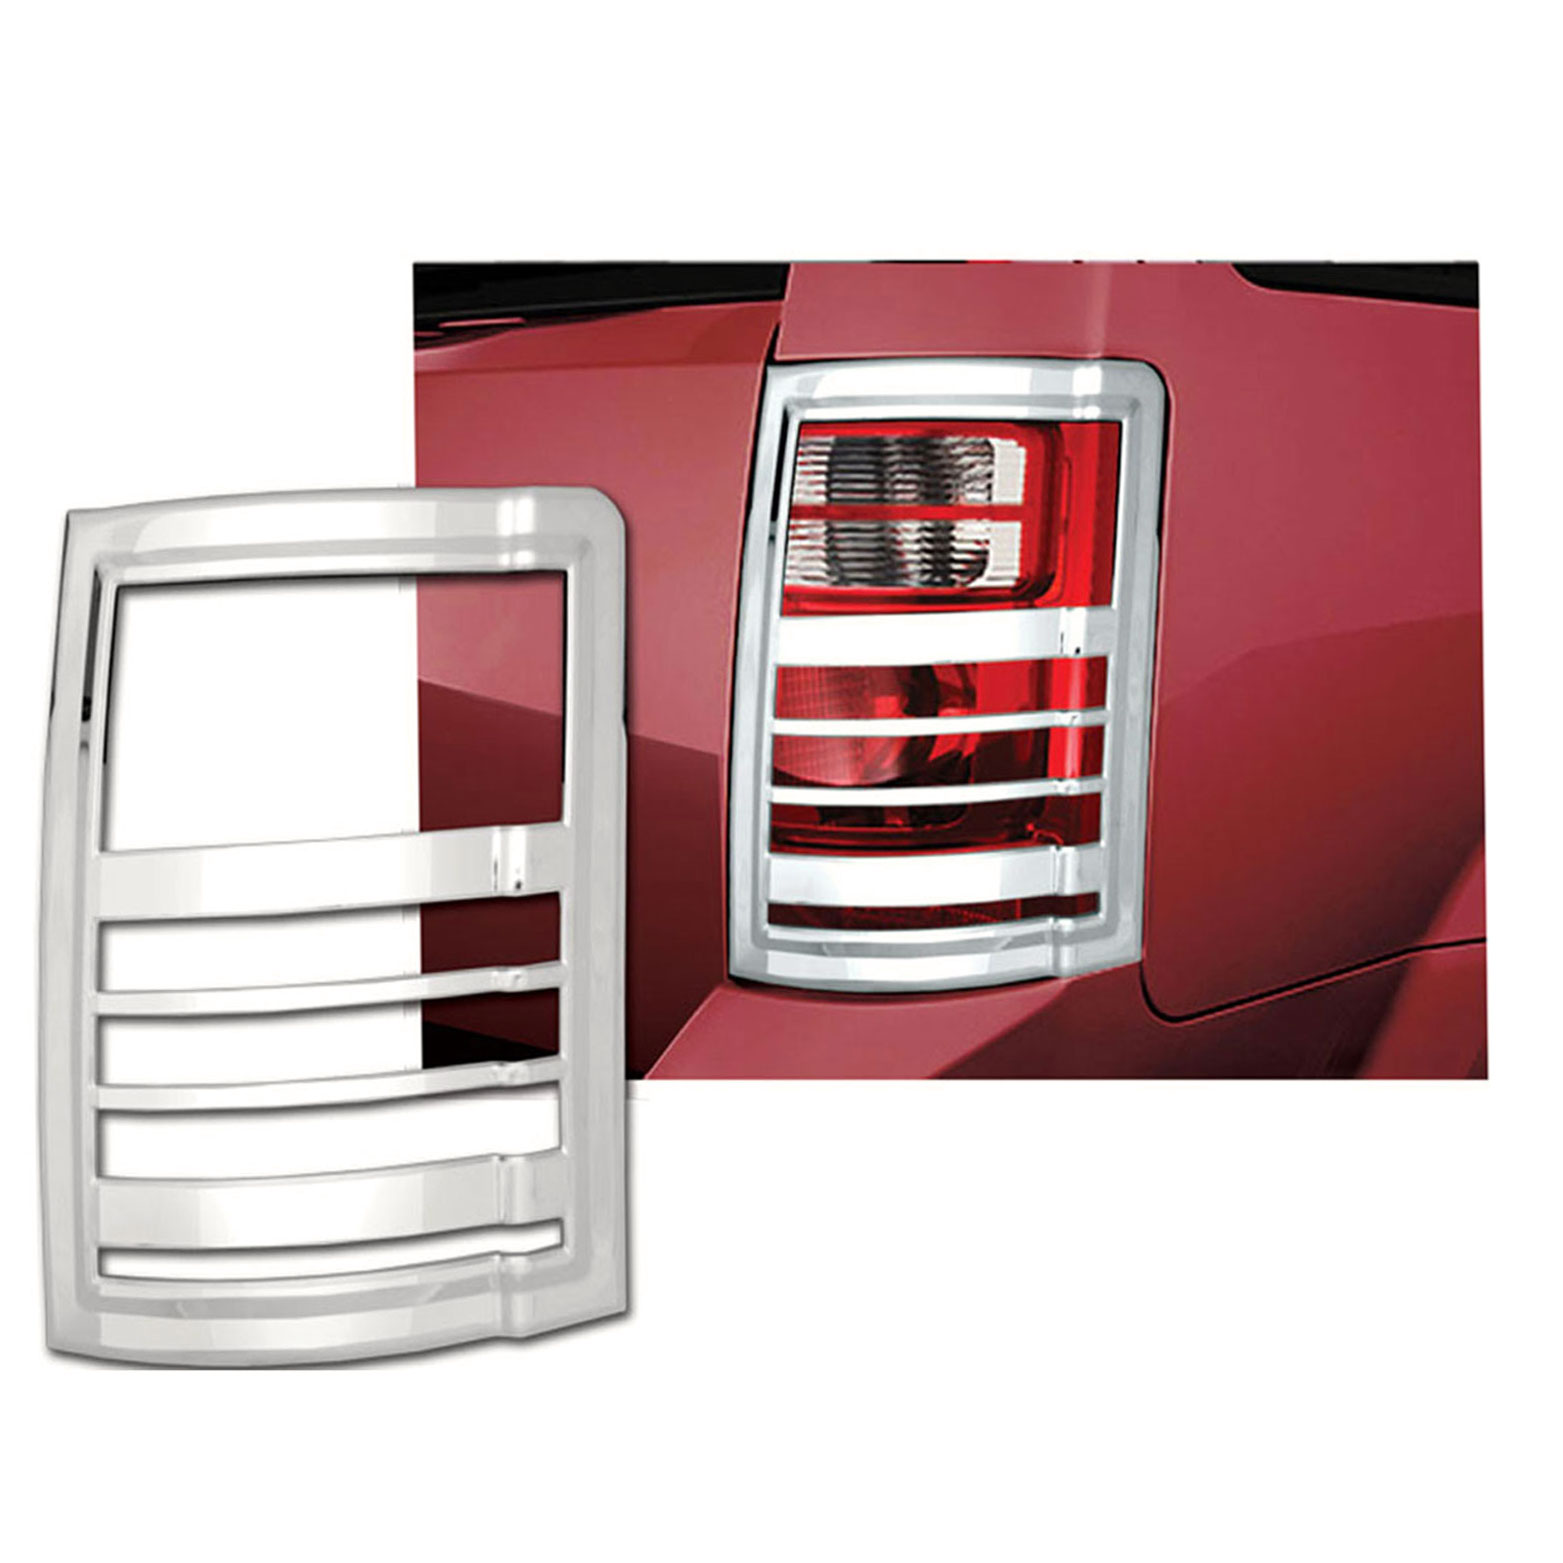 Tail Light Bezels for 2008-2010 Chrysler Town & Country [Chrome] Premium FX | eBay Chrysler Town And Country Tail Light Cover